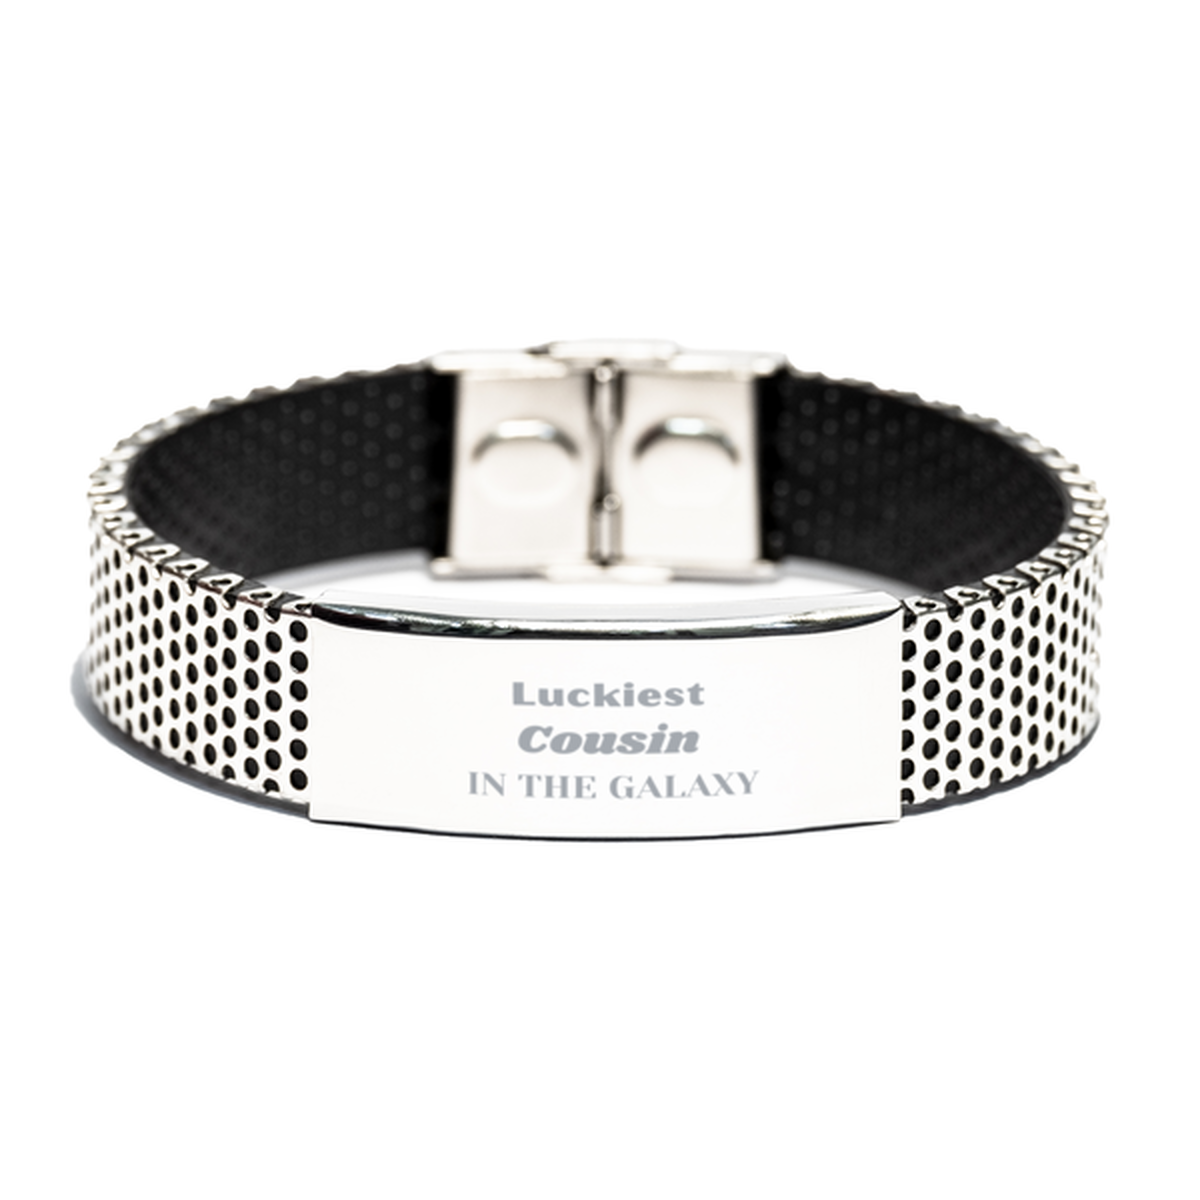 Luckiest Cousin in the Galaxy, To My Cousin Engraved Gifts, Christmas Cousin Stainless Steel Bracelet Gifts, X-mas Birthday Unique Gifts For Cousin Men Women